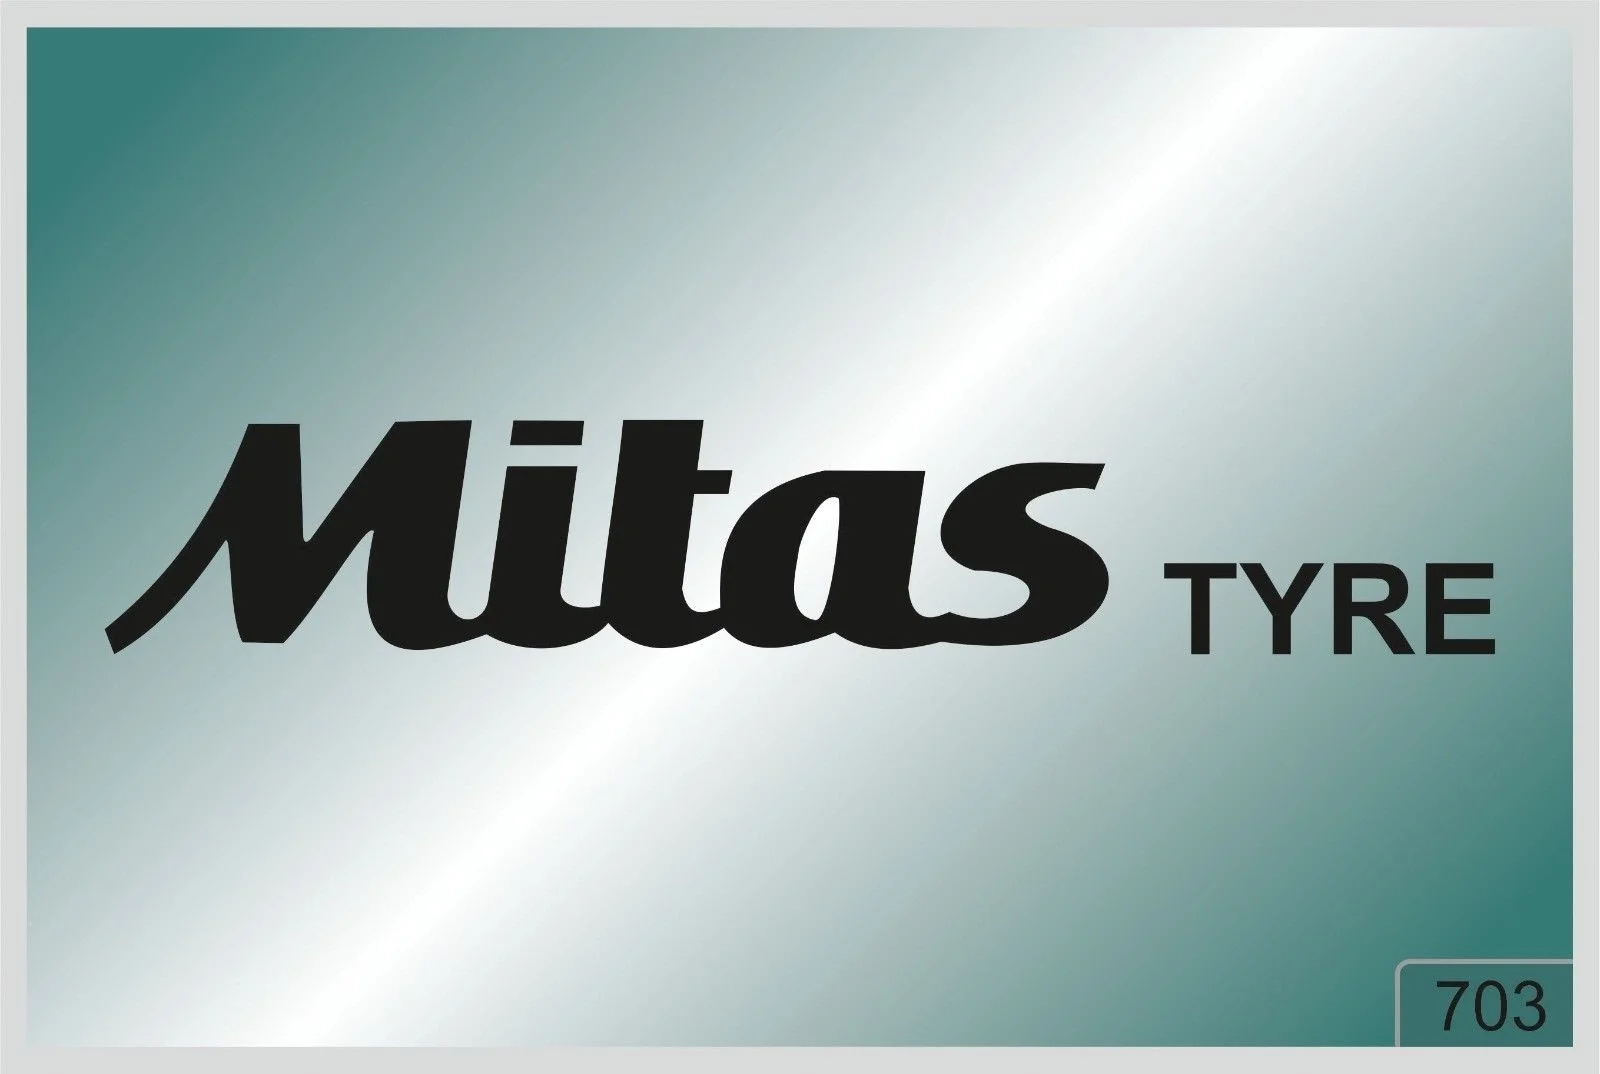 

MITAS tyre x2 pcs. stickers - HIGH QUALITY DECALS different colors 703